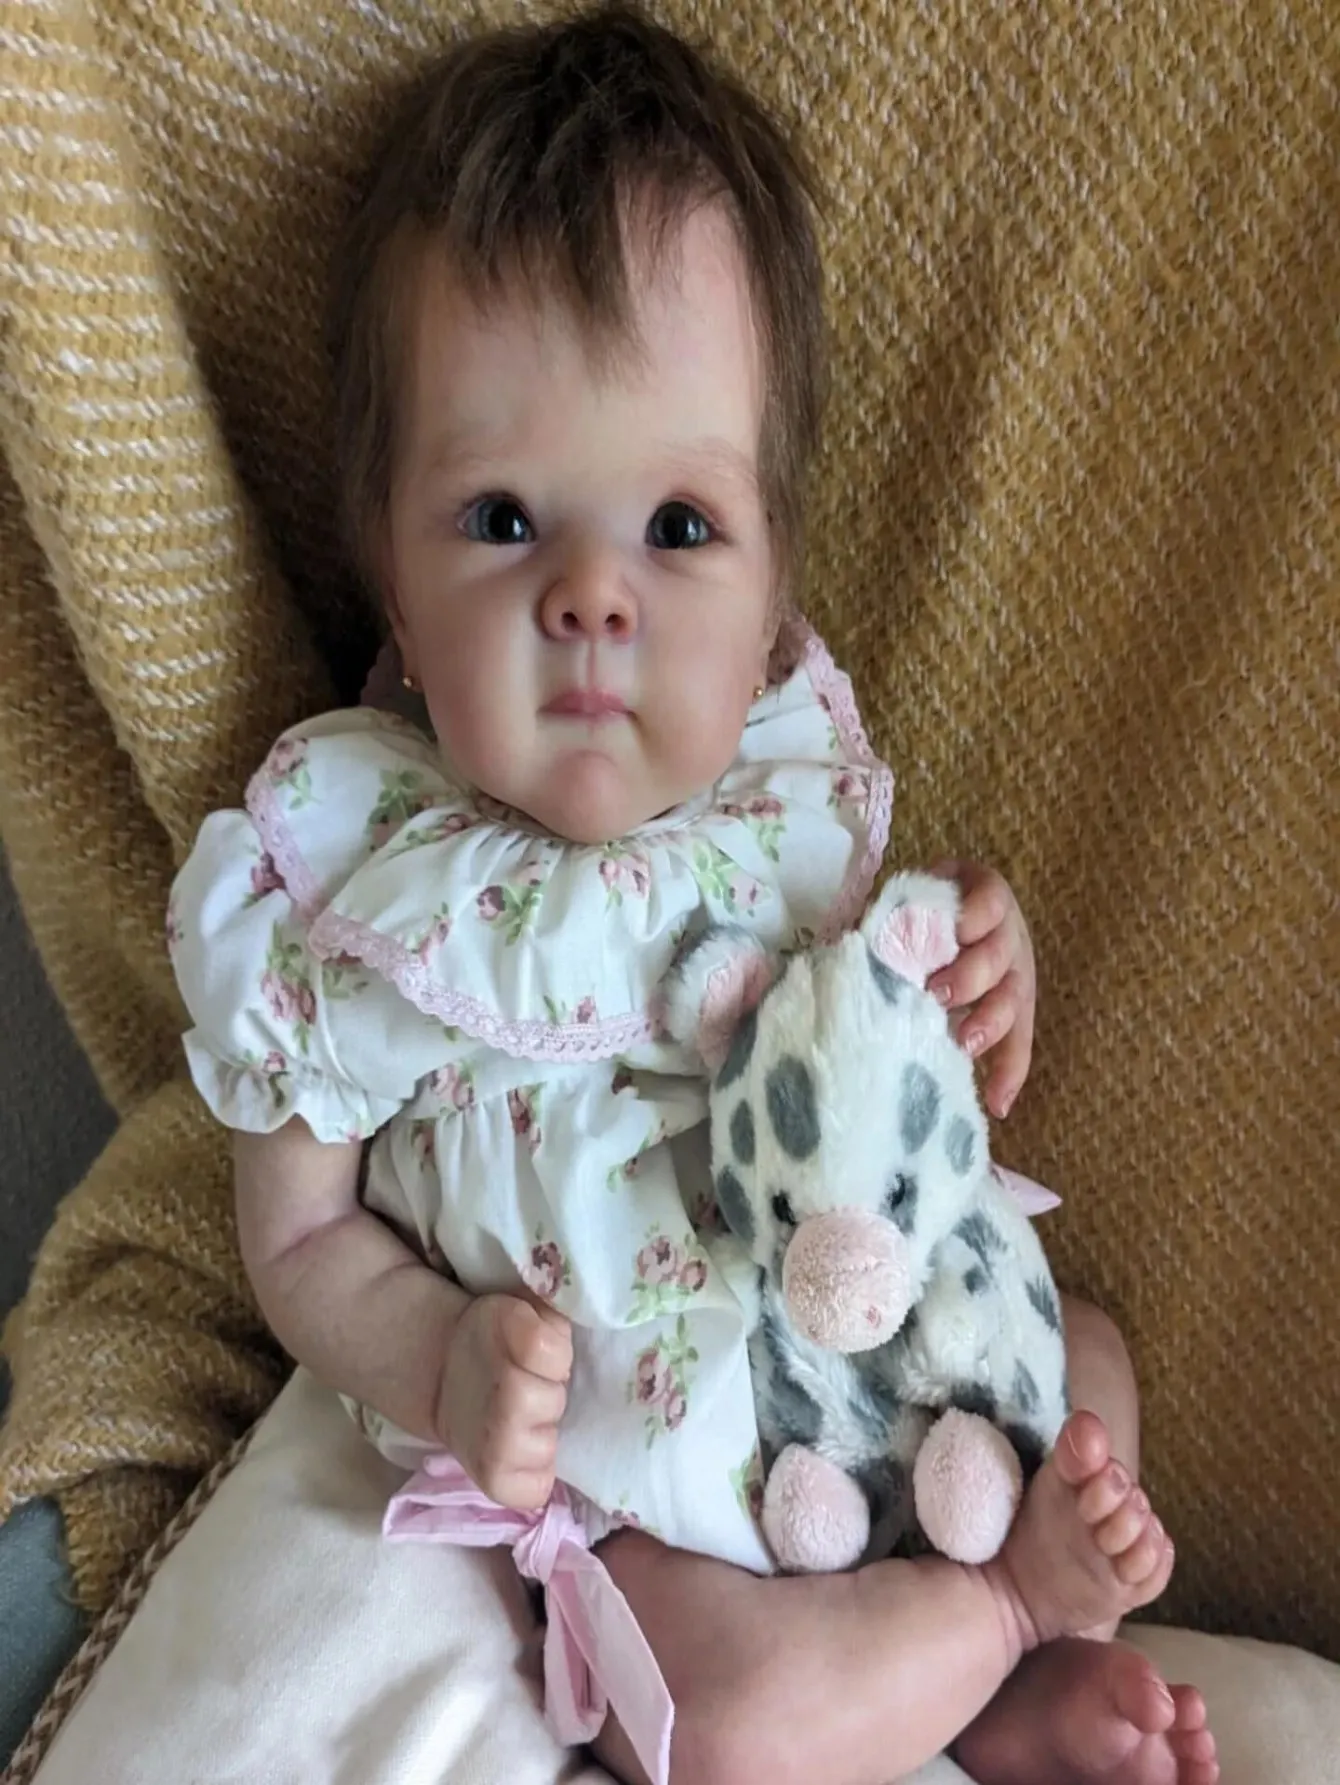 

18-Inch Realistic Loulou Bebe Reborn Doll With Painted 3D Hair Handmade Soft Newborn Series Doll Birthday Gift Full Body Soft